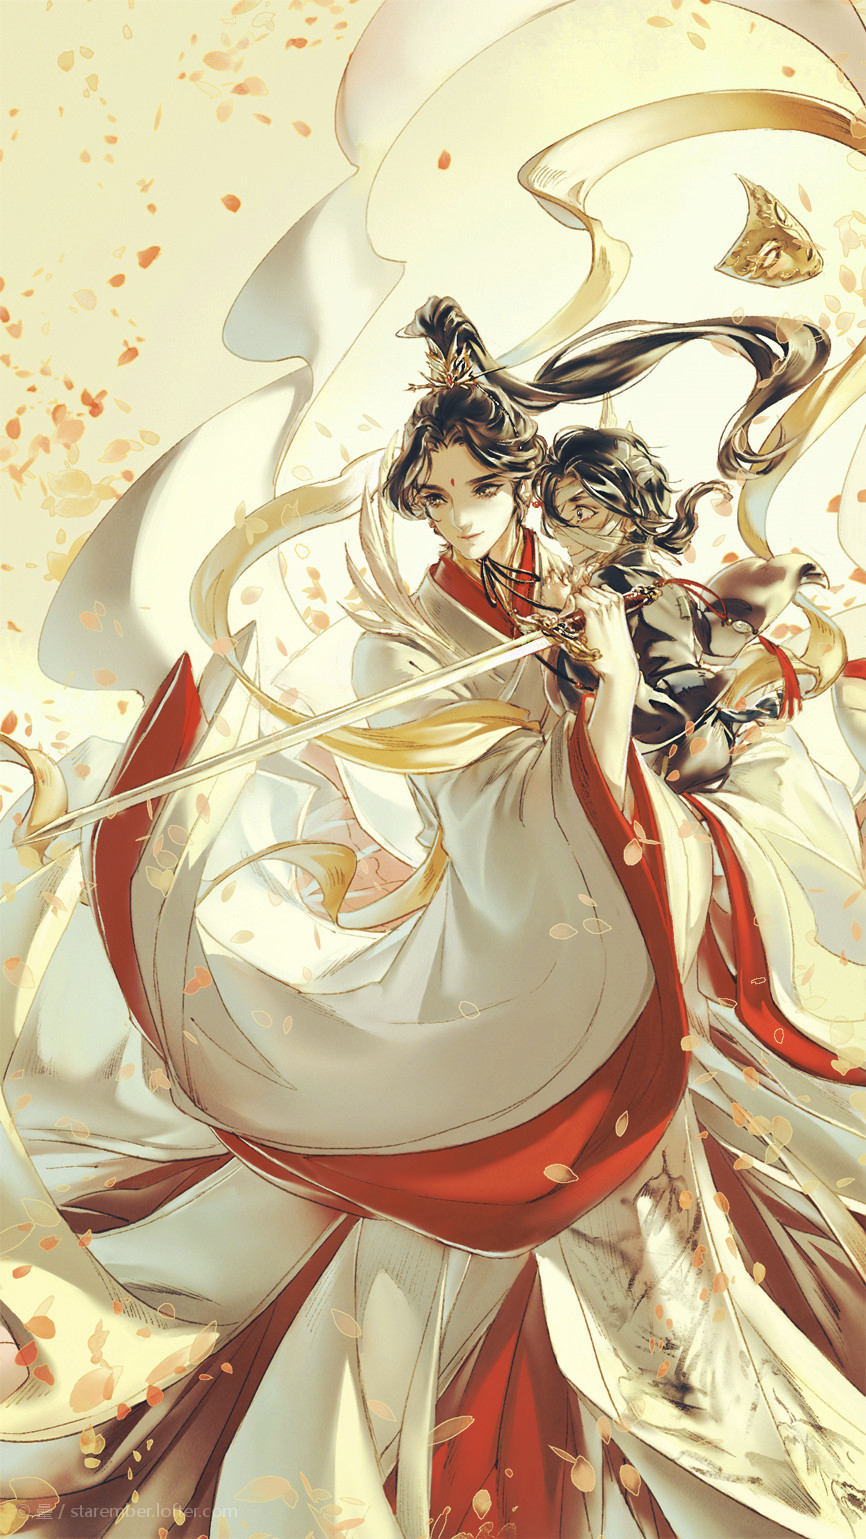 Tian Guan Ci Fu (Heaven Official's Blessing) art of (then mortal) Crown Prince Xie Lian rescuing a small child during the Offering to. Blessed, Anime, Heaven